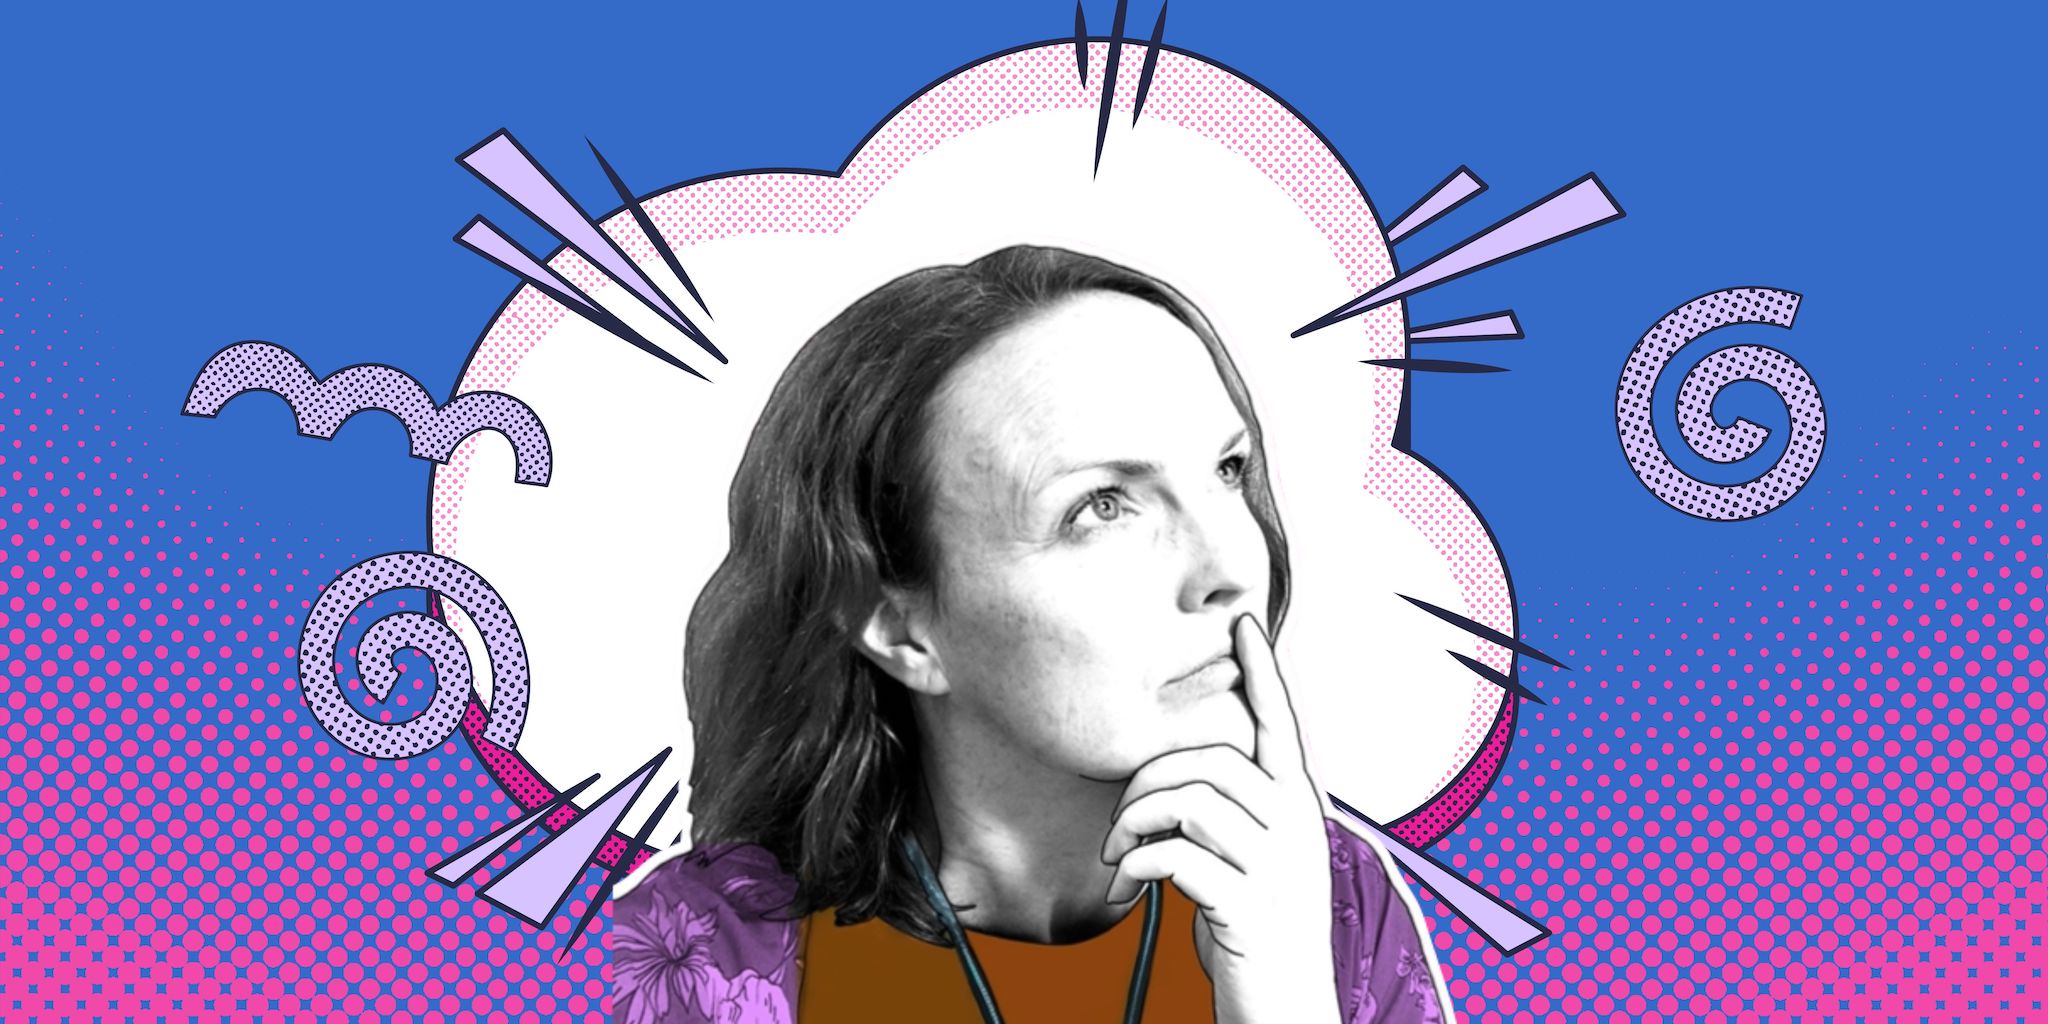 Pop Art style graphic in blue and pink with Ruth in black and white looking contemplative.